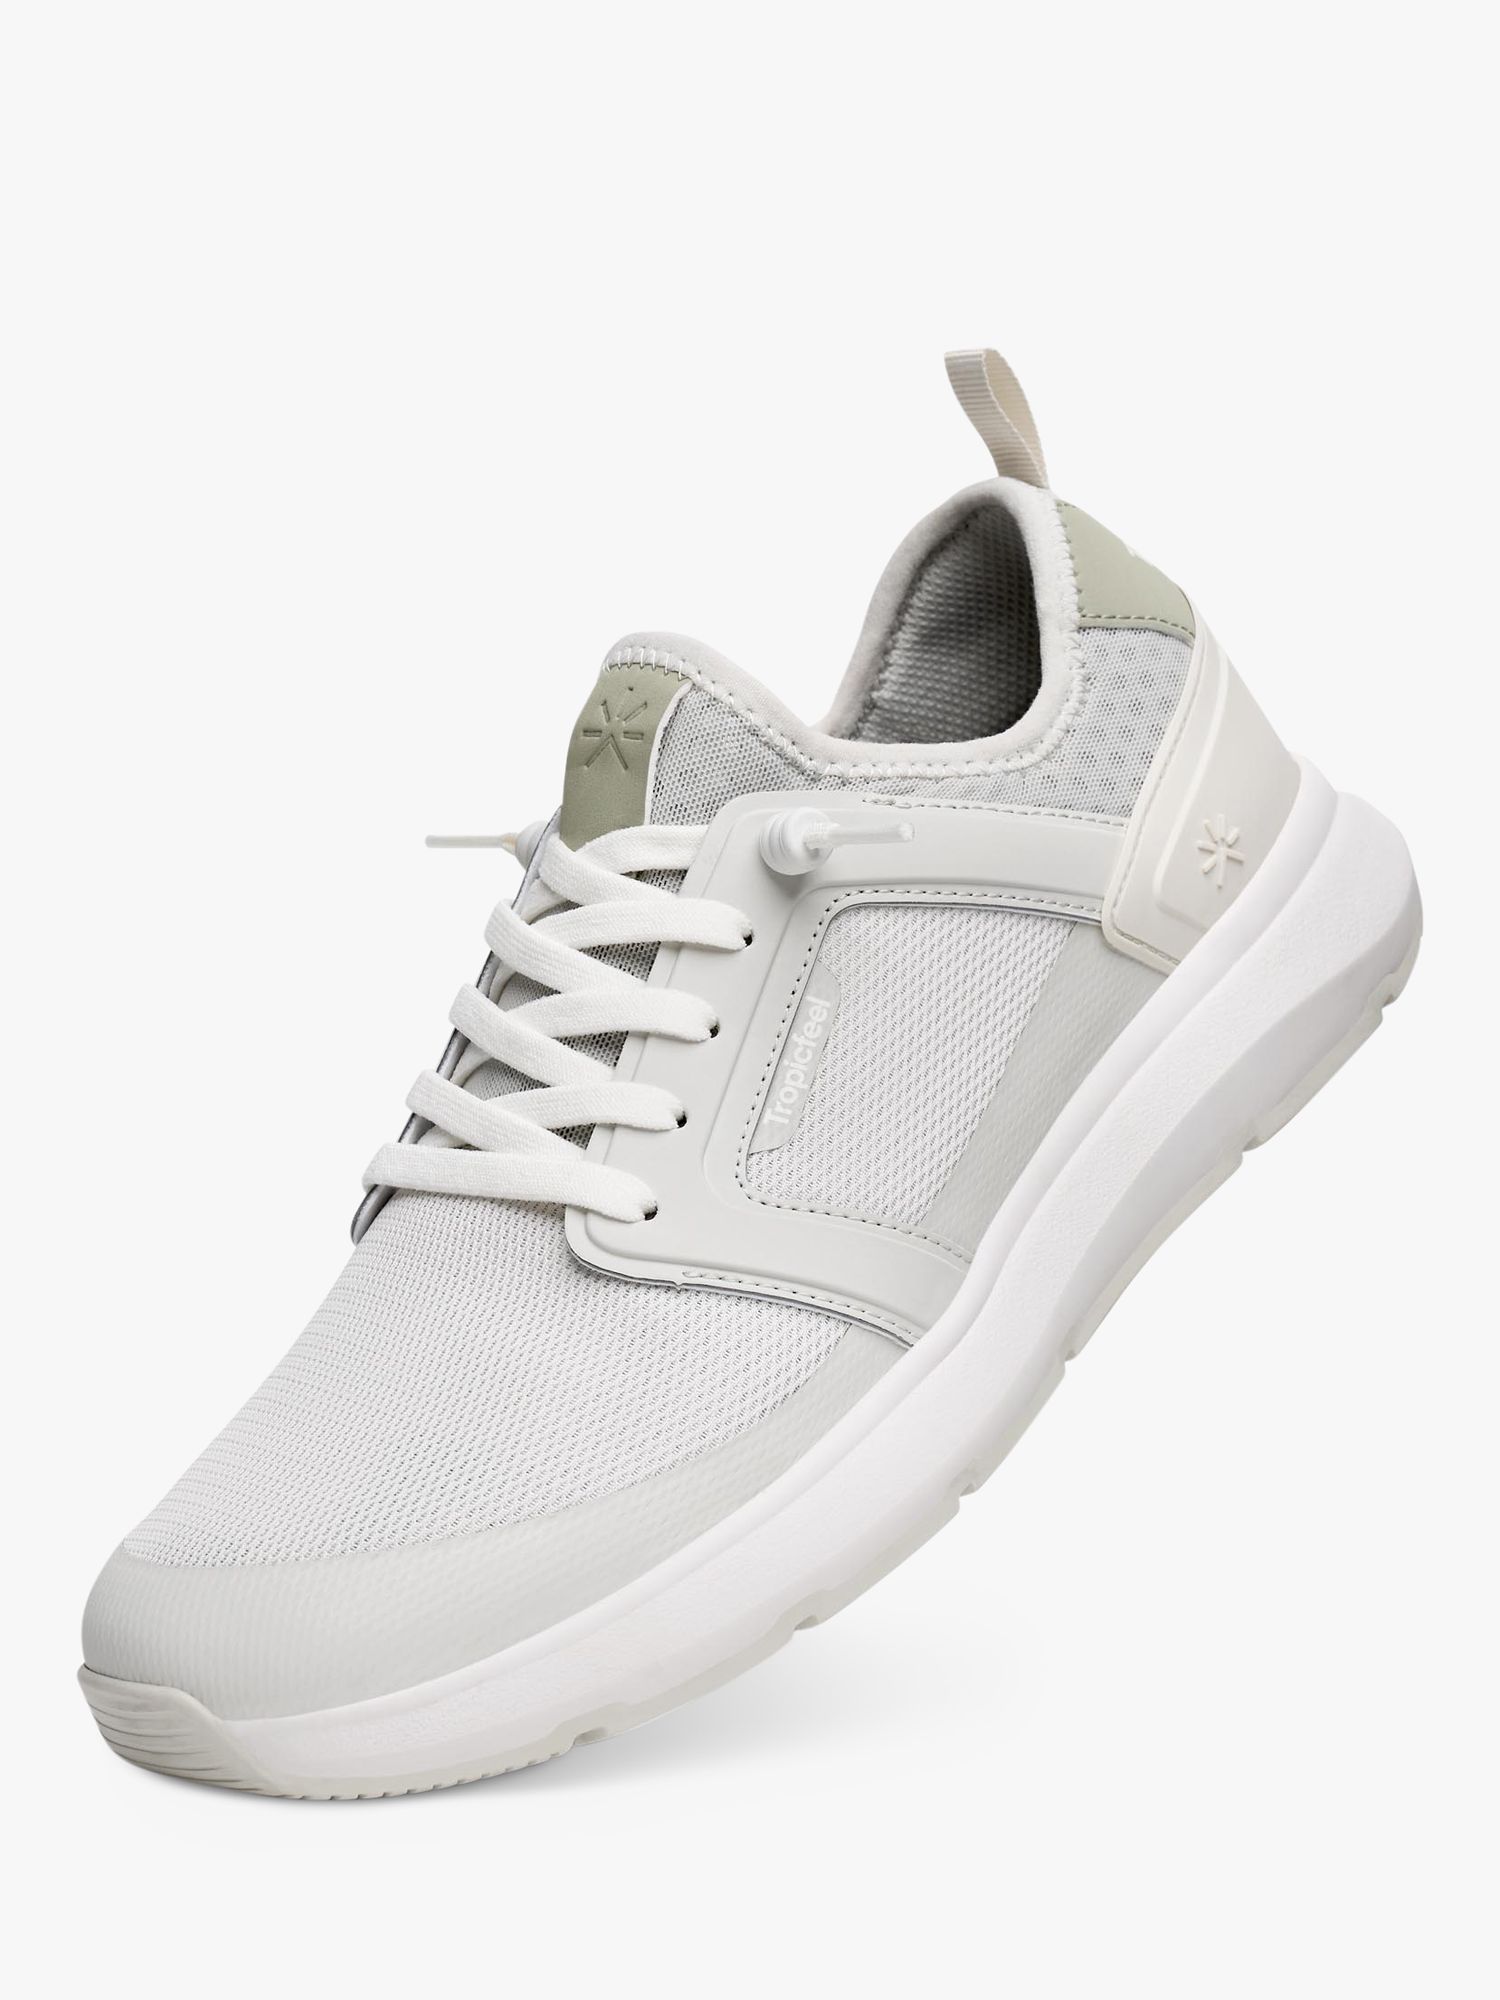 Buy Tropicfeel Monsoon All-Terrain Recycled Trainers Online at johnlewis.com